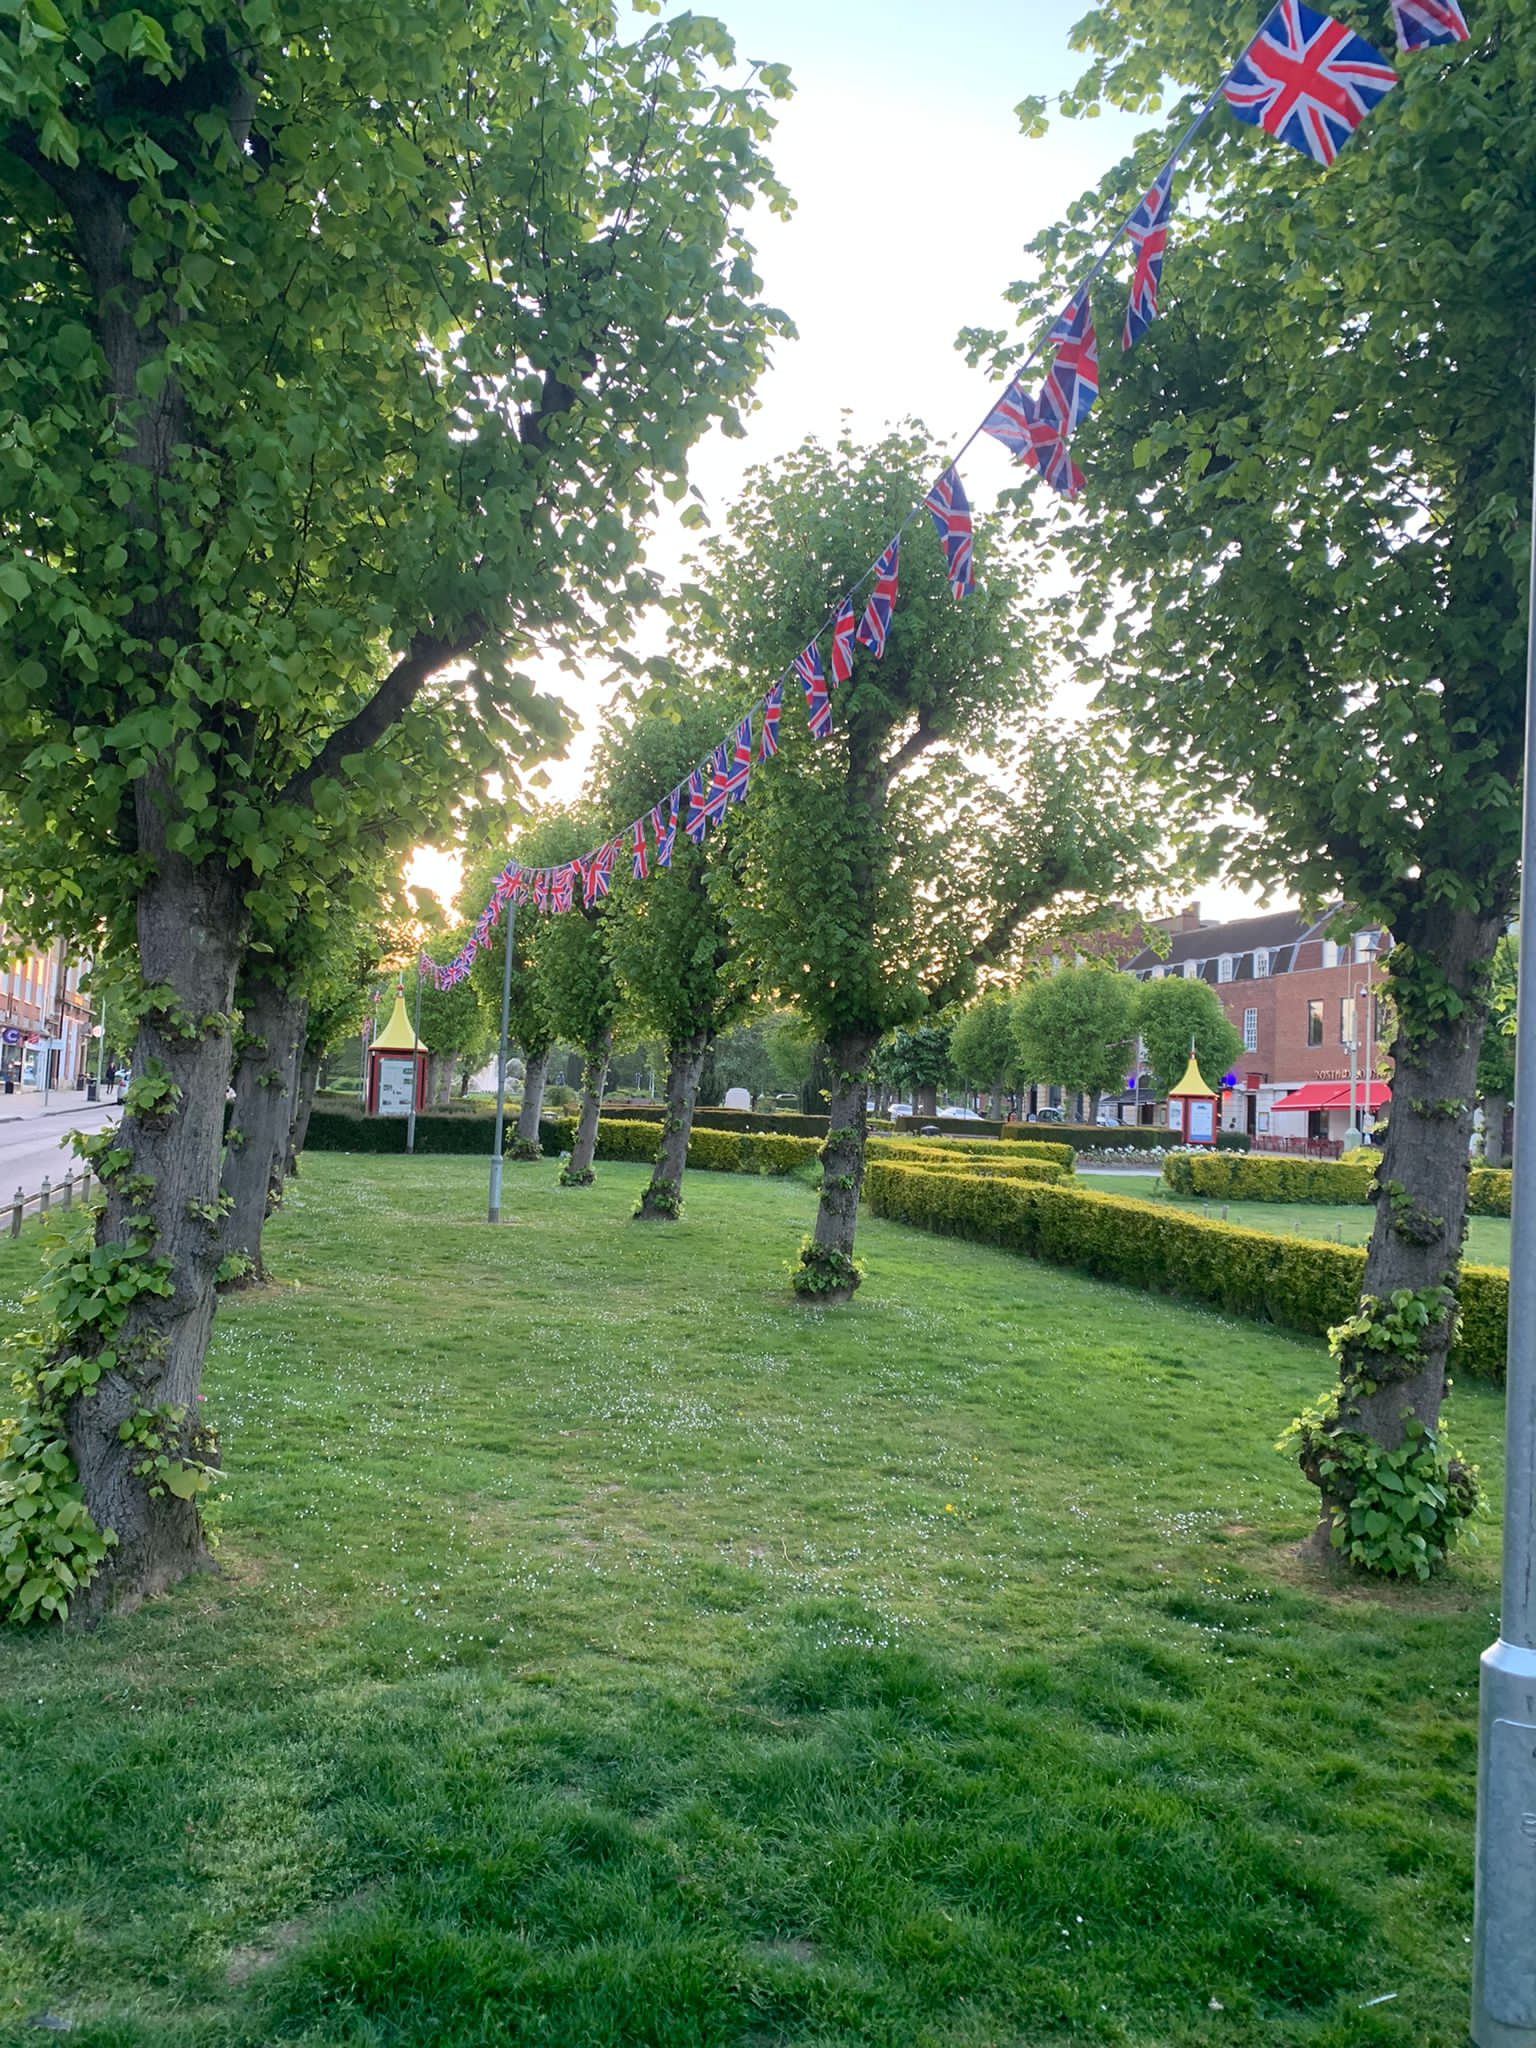 Trees in Welwyn Garden City town centre with British flag bunting hung between them